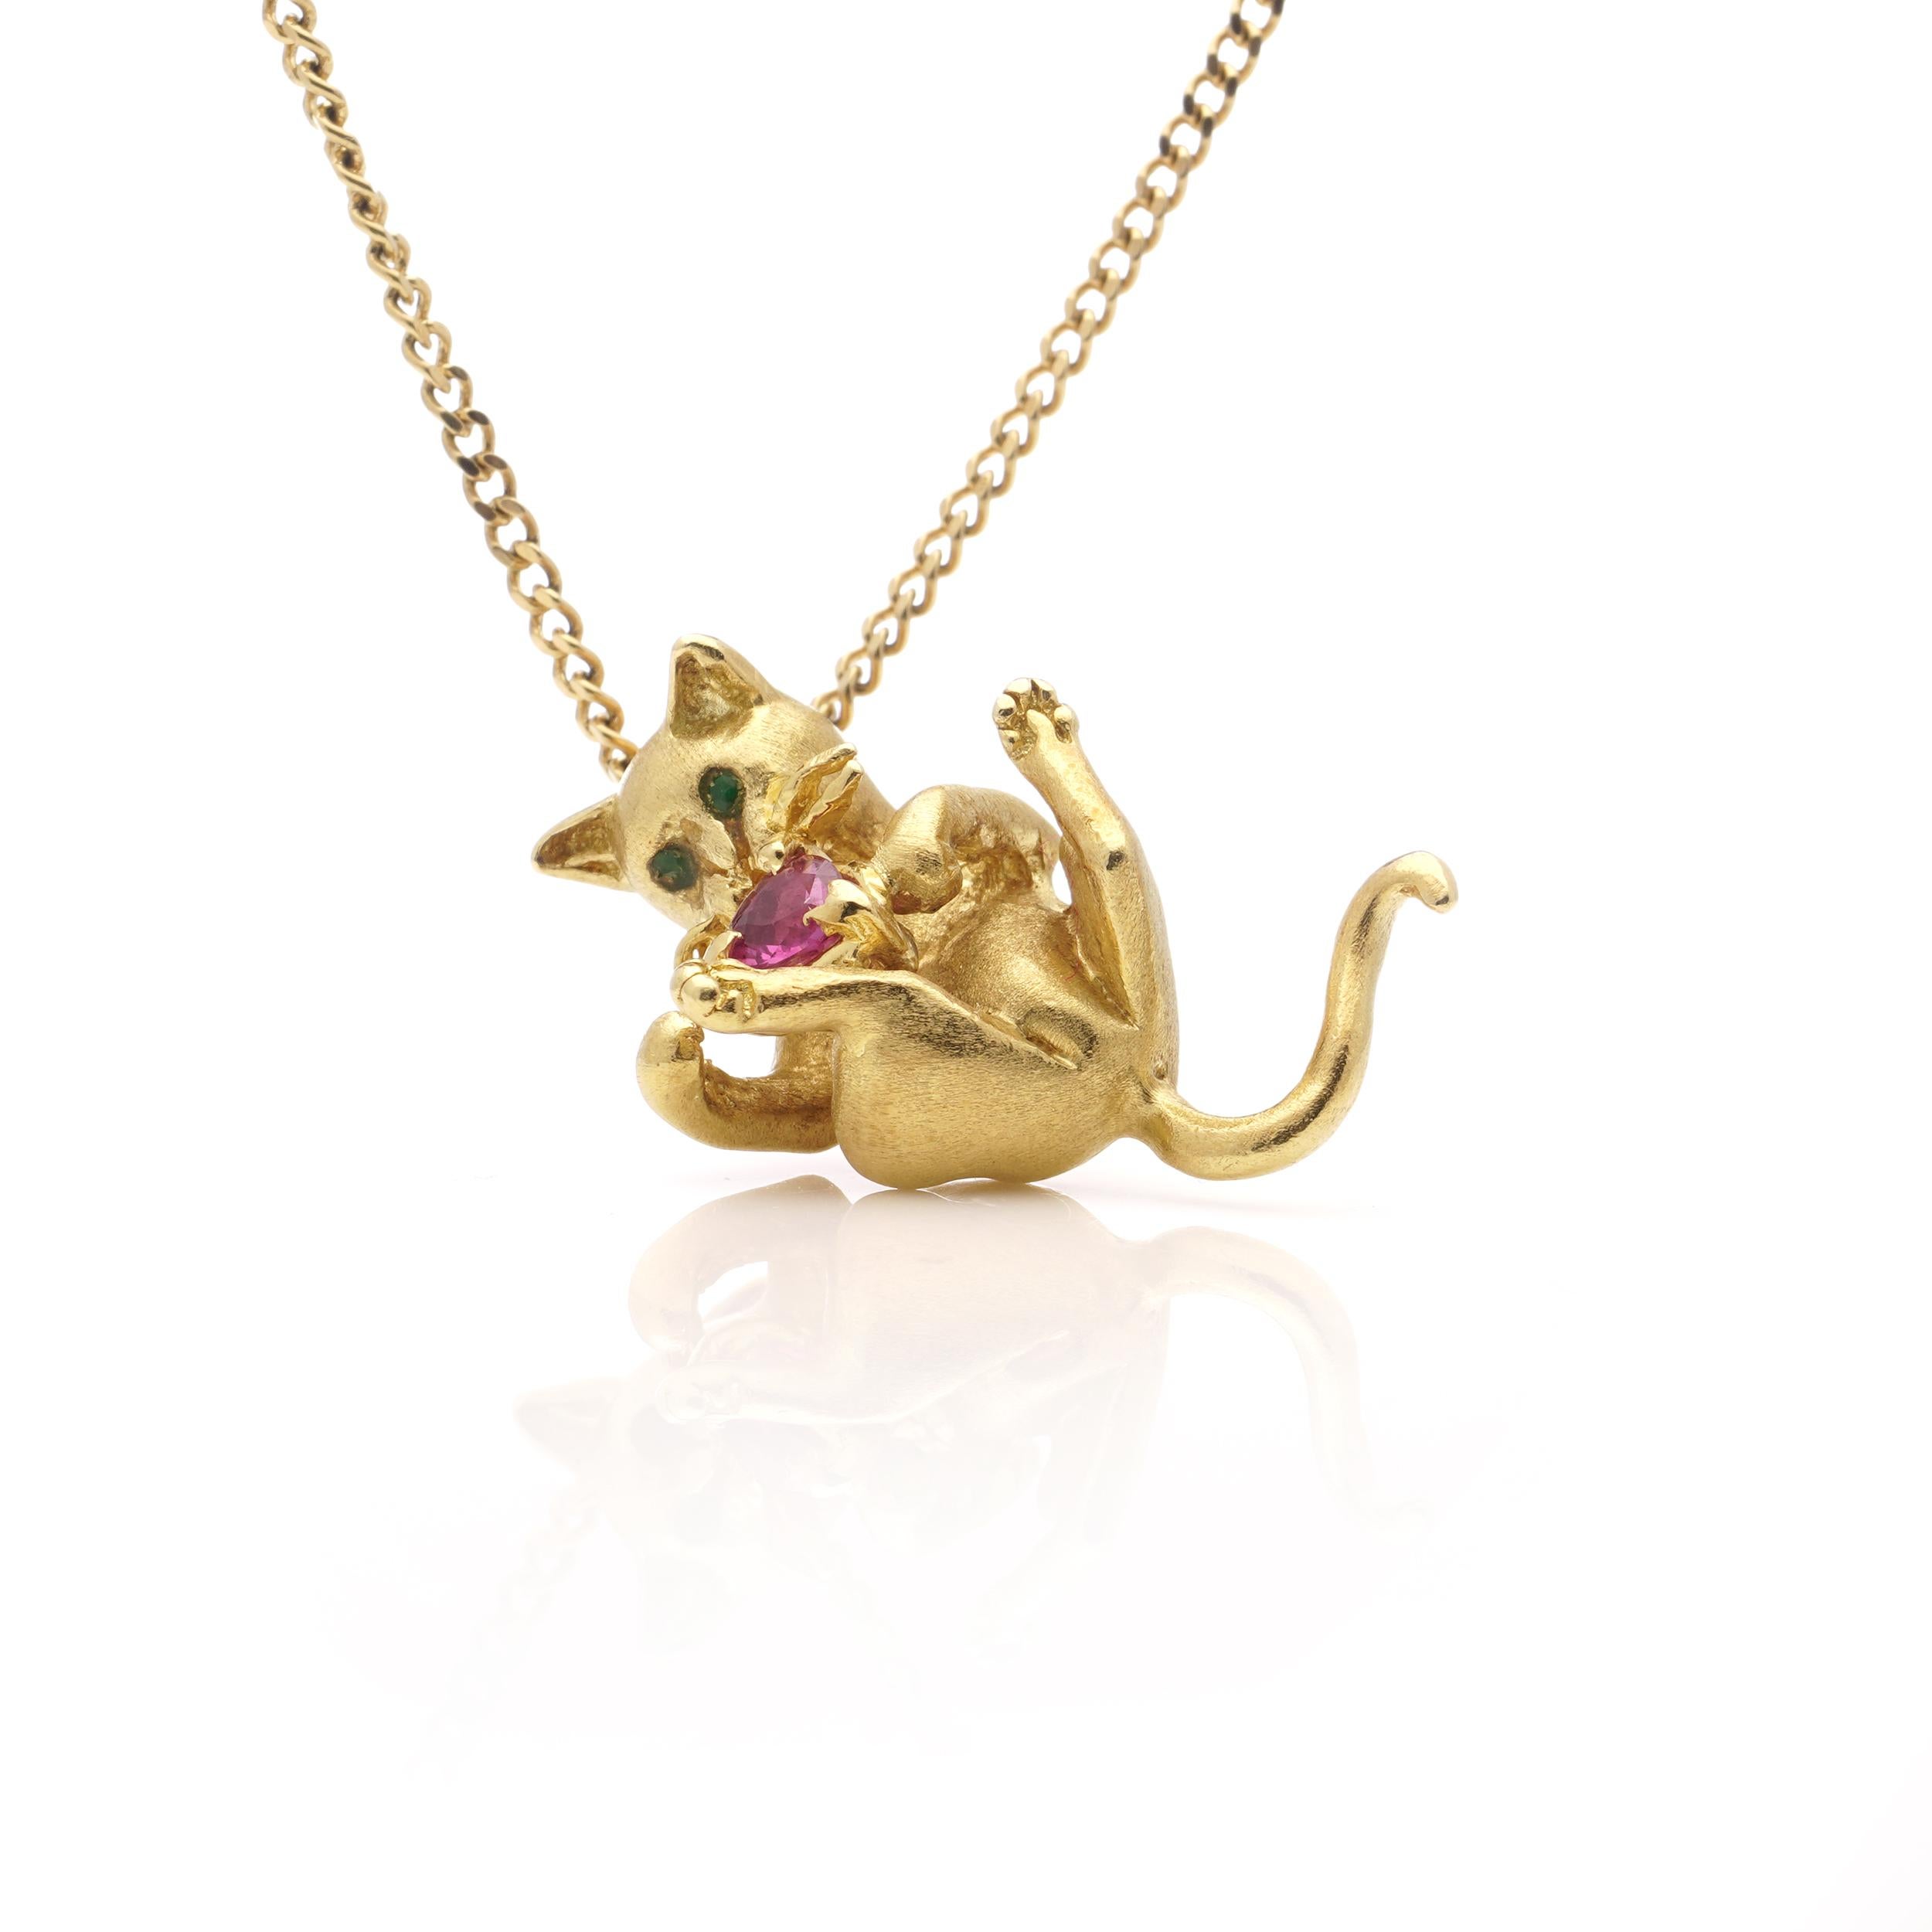 Fred Paris 18kt. yellow gold chain necklace with kitty holding ruby pendant 7